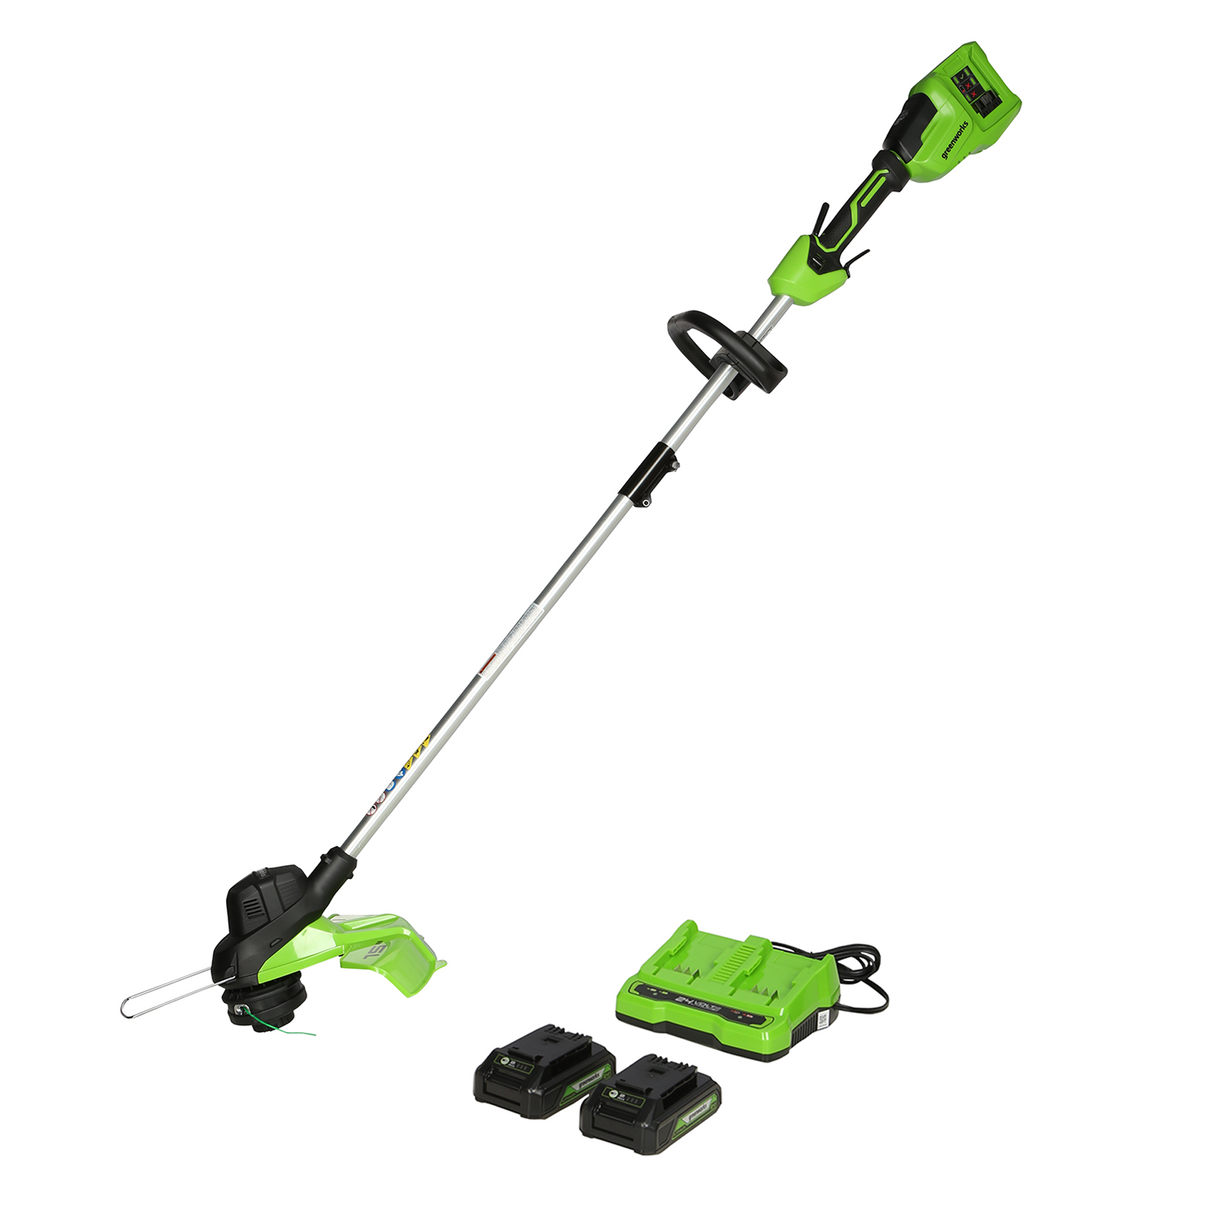 48V (2 x 24V) 15" TORQDRIVE Cordless String Trimmer, (2) 2.0Ah USB Batteries and Dual Port Charger Included